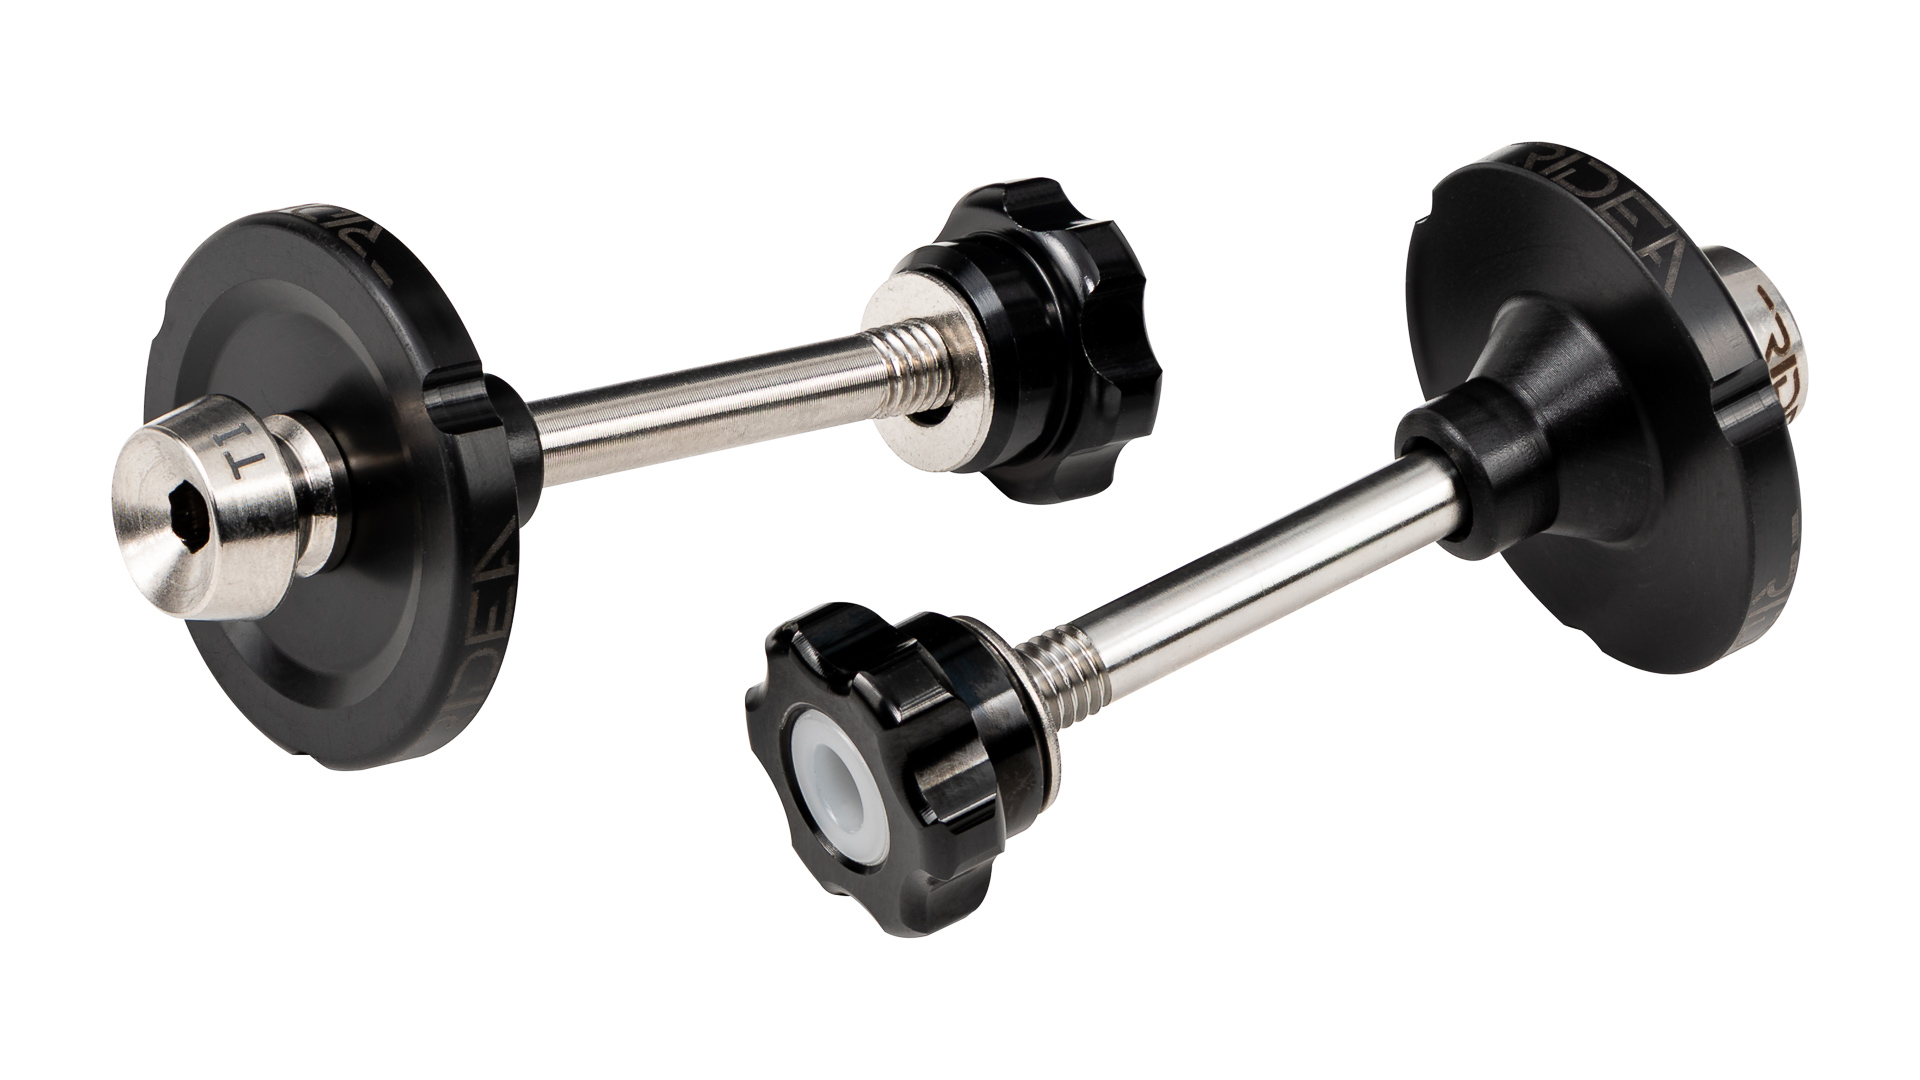 Suspension bolts for Brompton